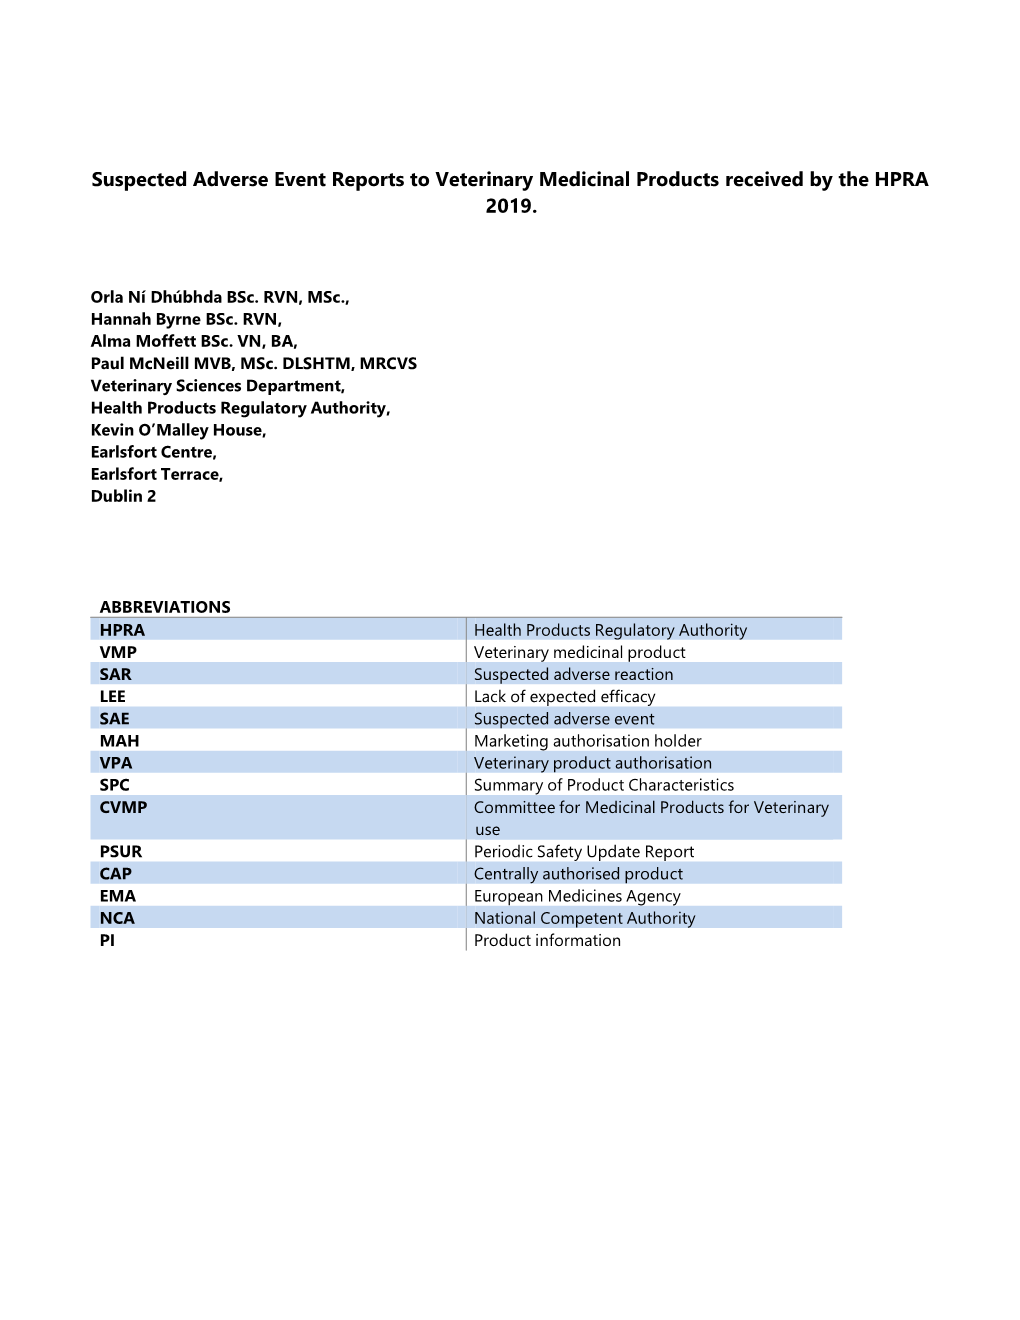 Suspected Adverse Event Reports to Veterinary Medicinal Products Received by the HPRA 2019